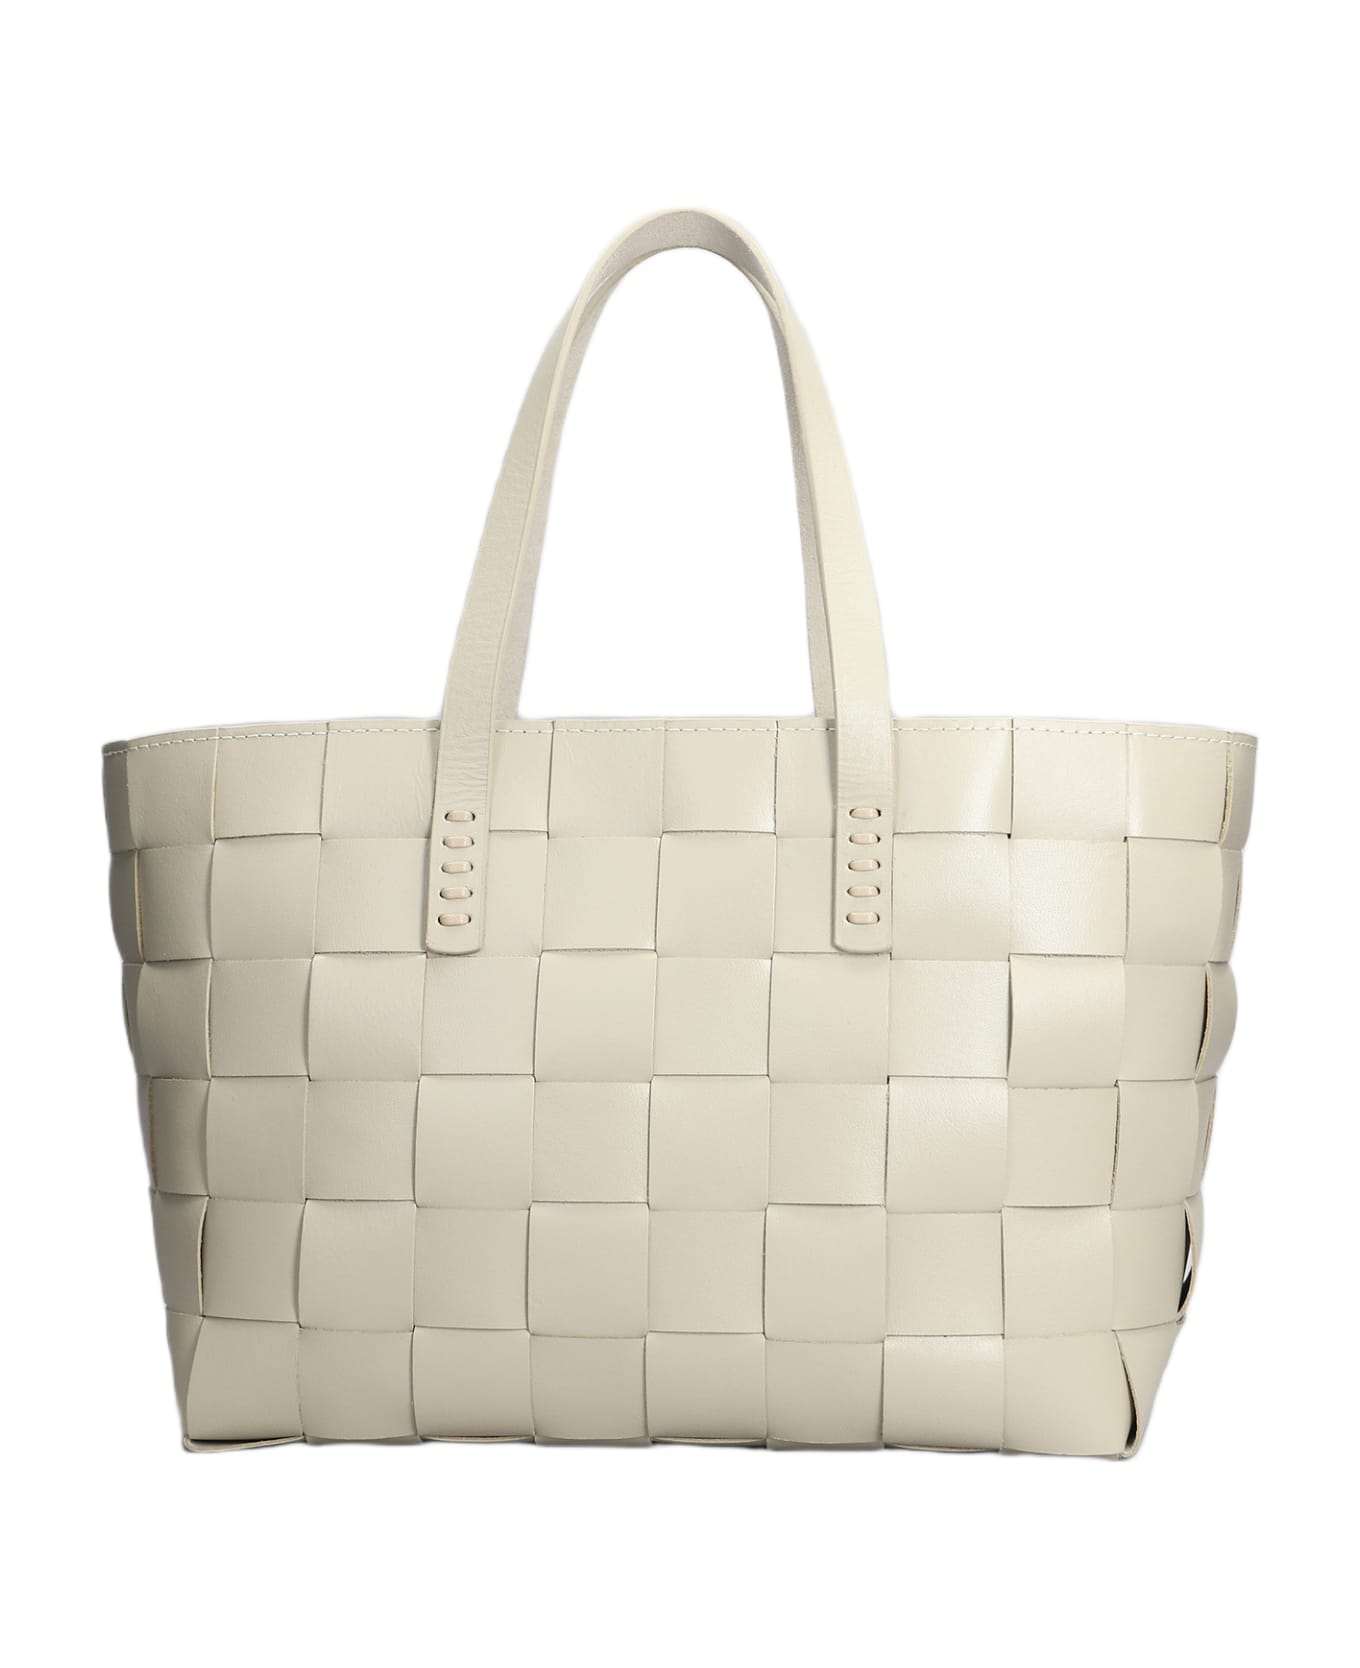 Dragon Diffusion Japan Tote Tote In Beige Leather - beige